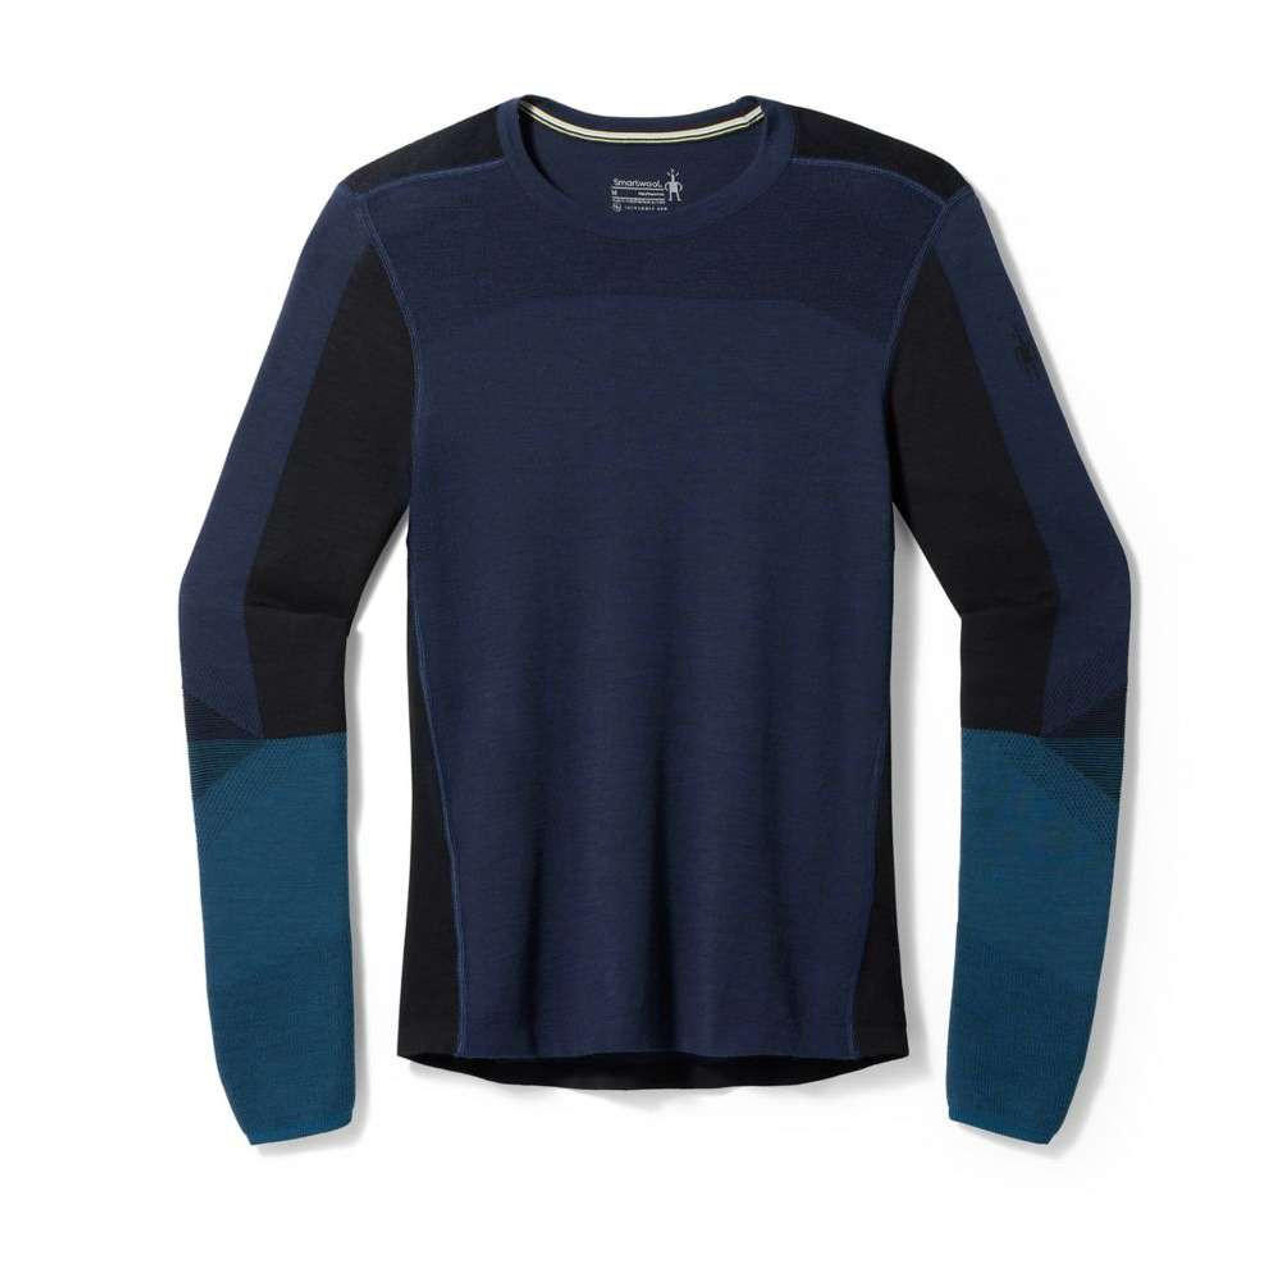 https://cdn11.bigcommerce.com/s-186hk/images/stencil/1280x1280/products/94788/159178/smartwool-2024-smartwool-intraknit-thermal-merino-base-layer-colorblock-crew__27769.1698350727.jpg?c=2?imbypass=on